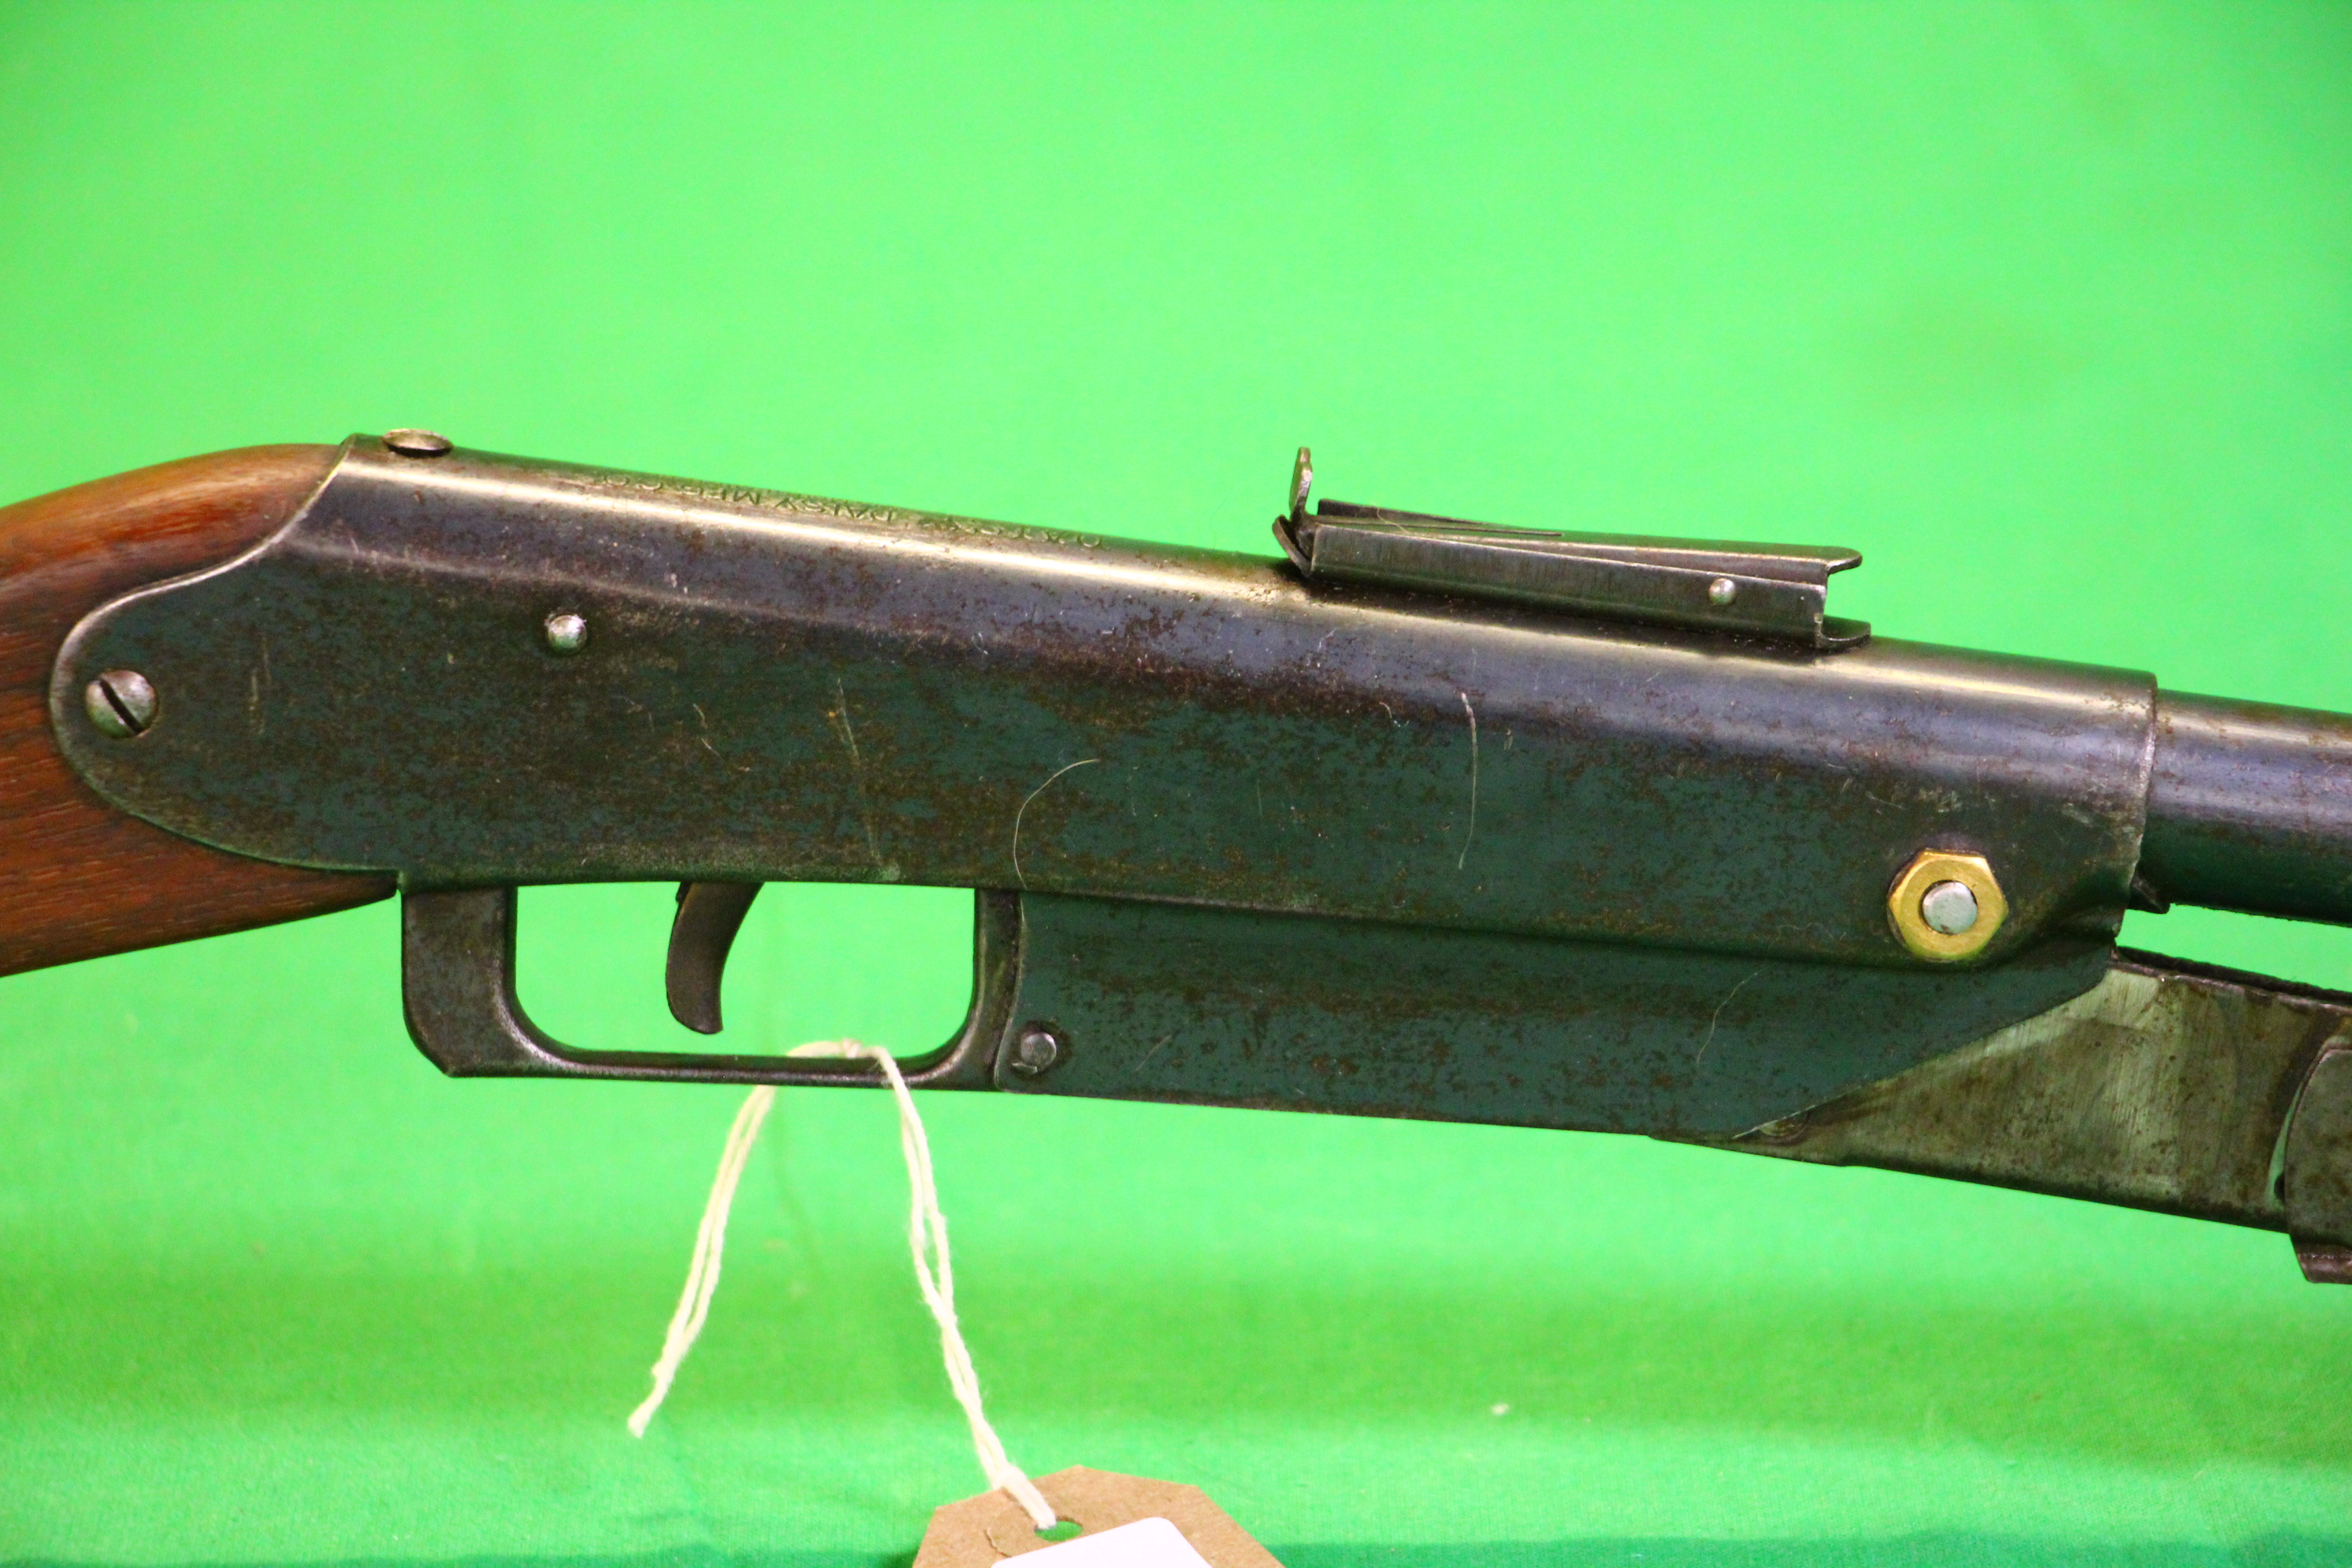 A DAISY MODEL 25 PUMP ACTION AIR GUN - (ALL GUNS TO BE INSPECTED AND SERVICED BY QUALIFIED GUNSMITH - Image 2 of 8